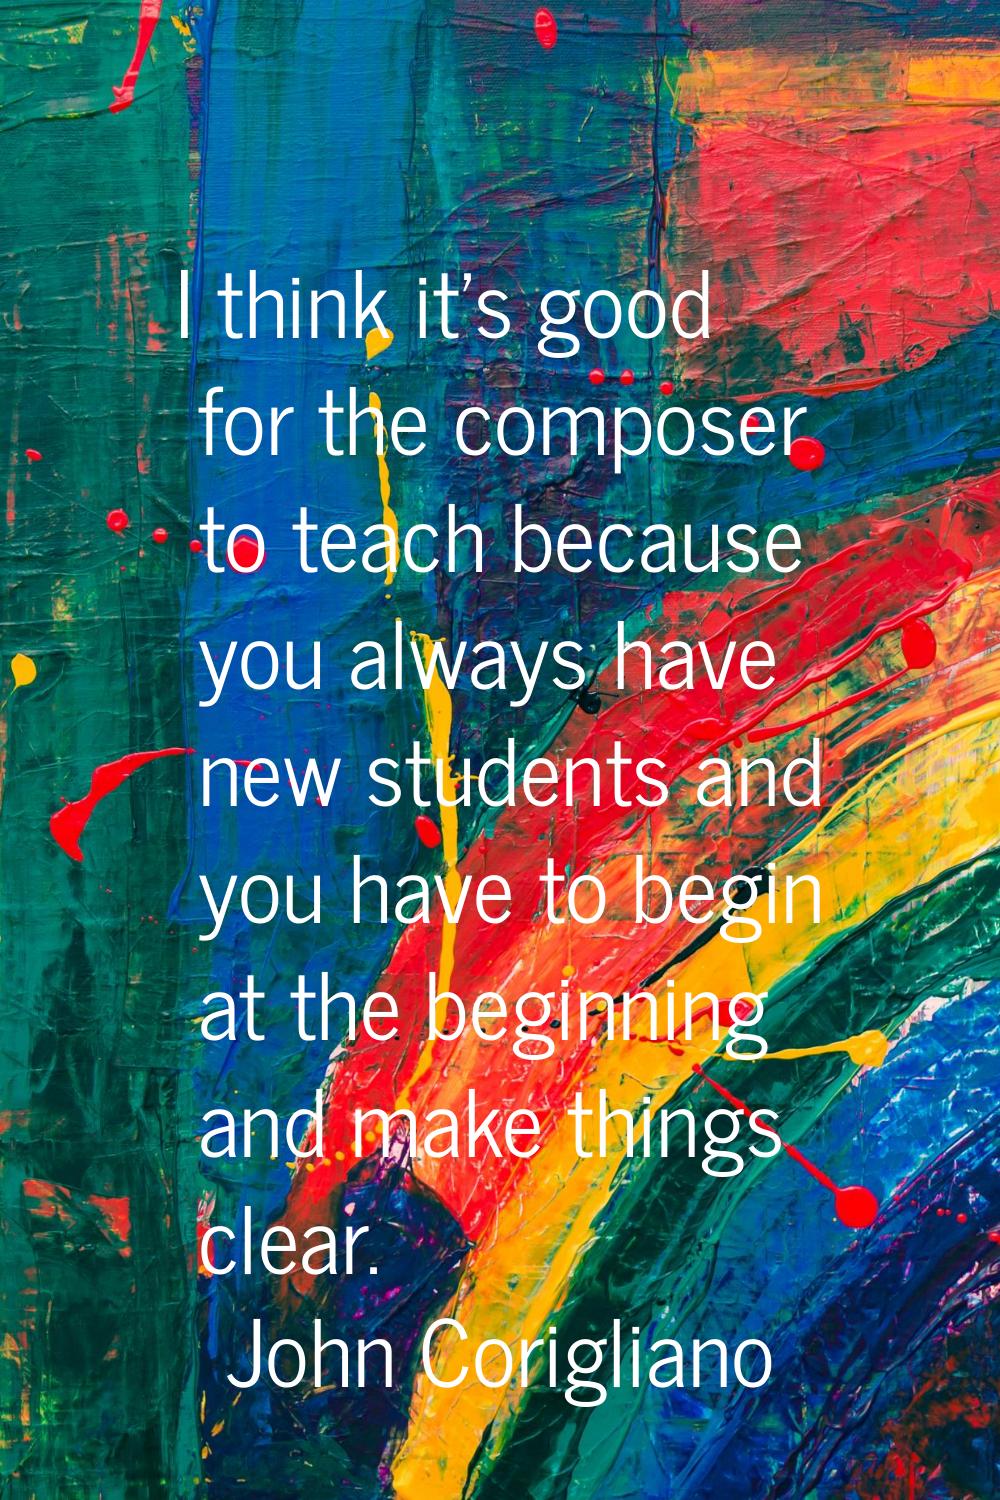 I think it's good for the composer to teach because you always have new students and you have to be